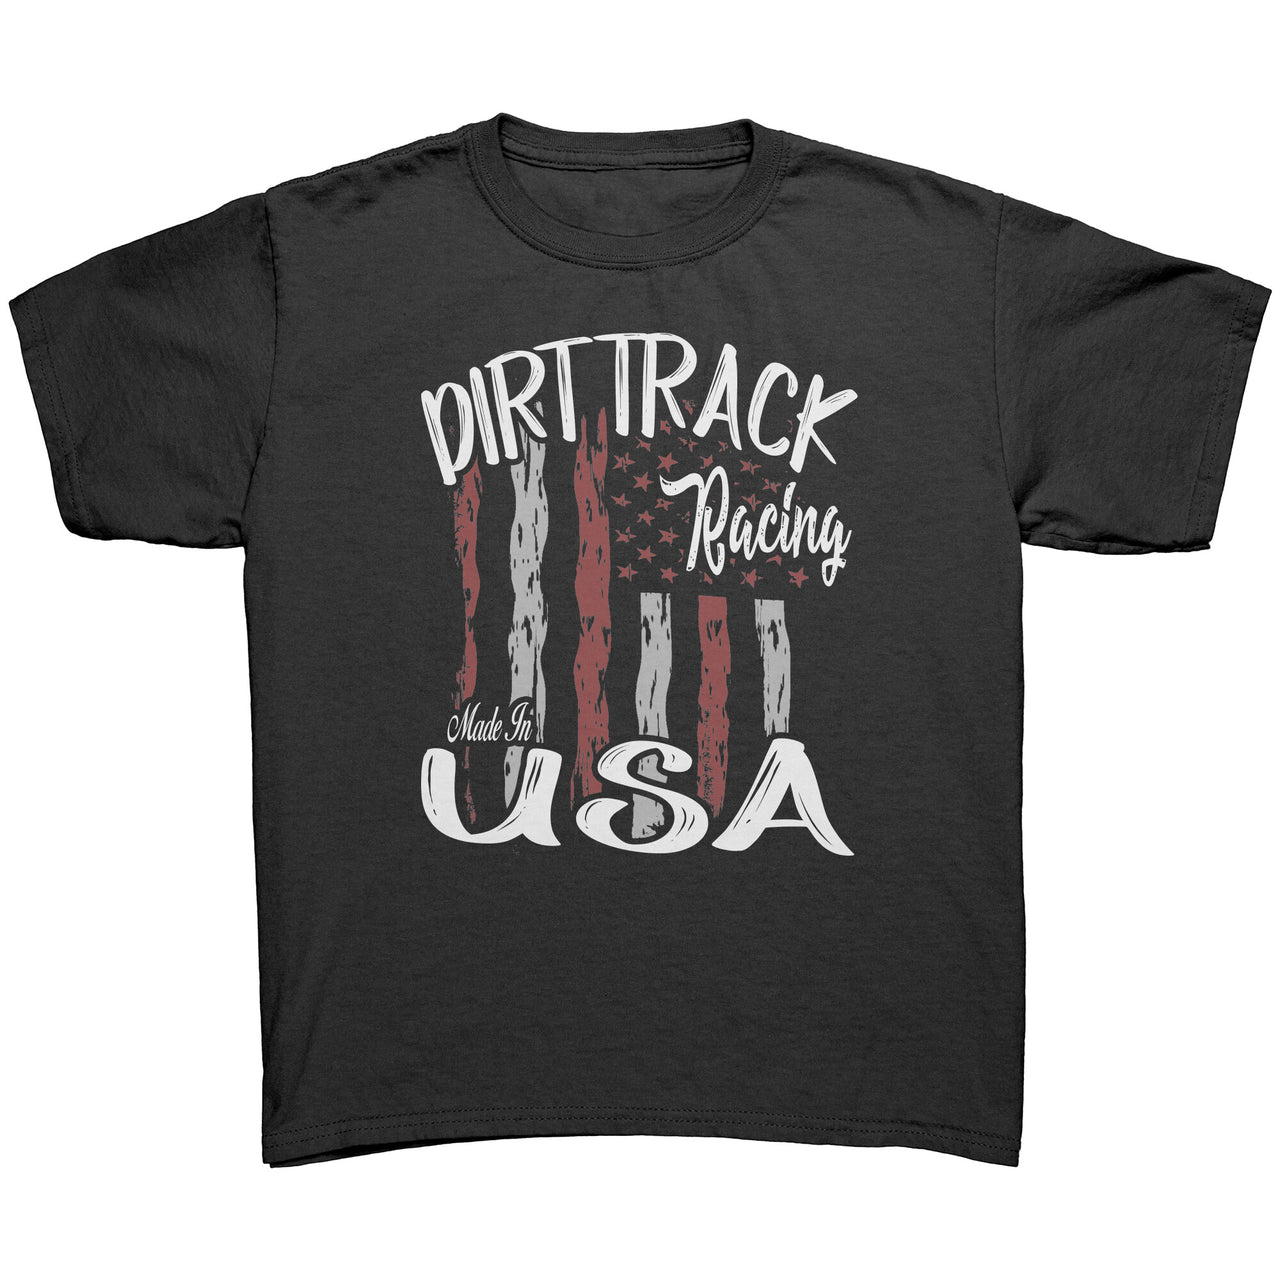 Dirt Track Racing Made in USA Youth t-Shirts/Hoodies